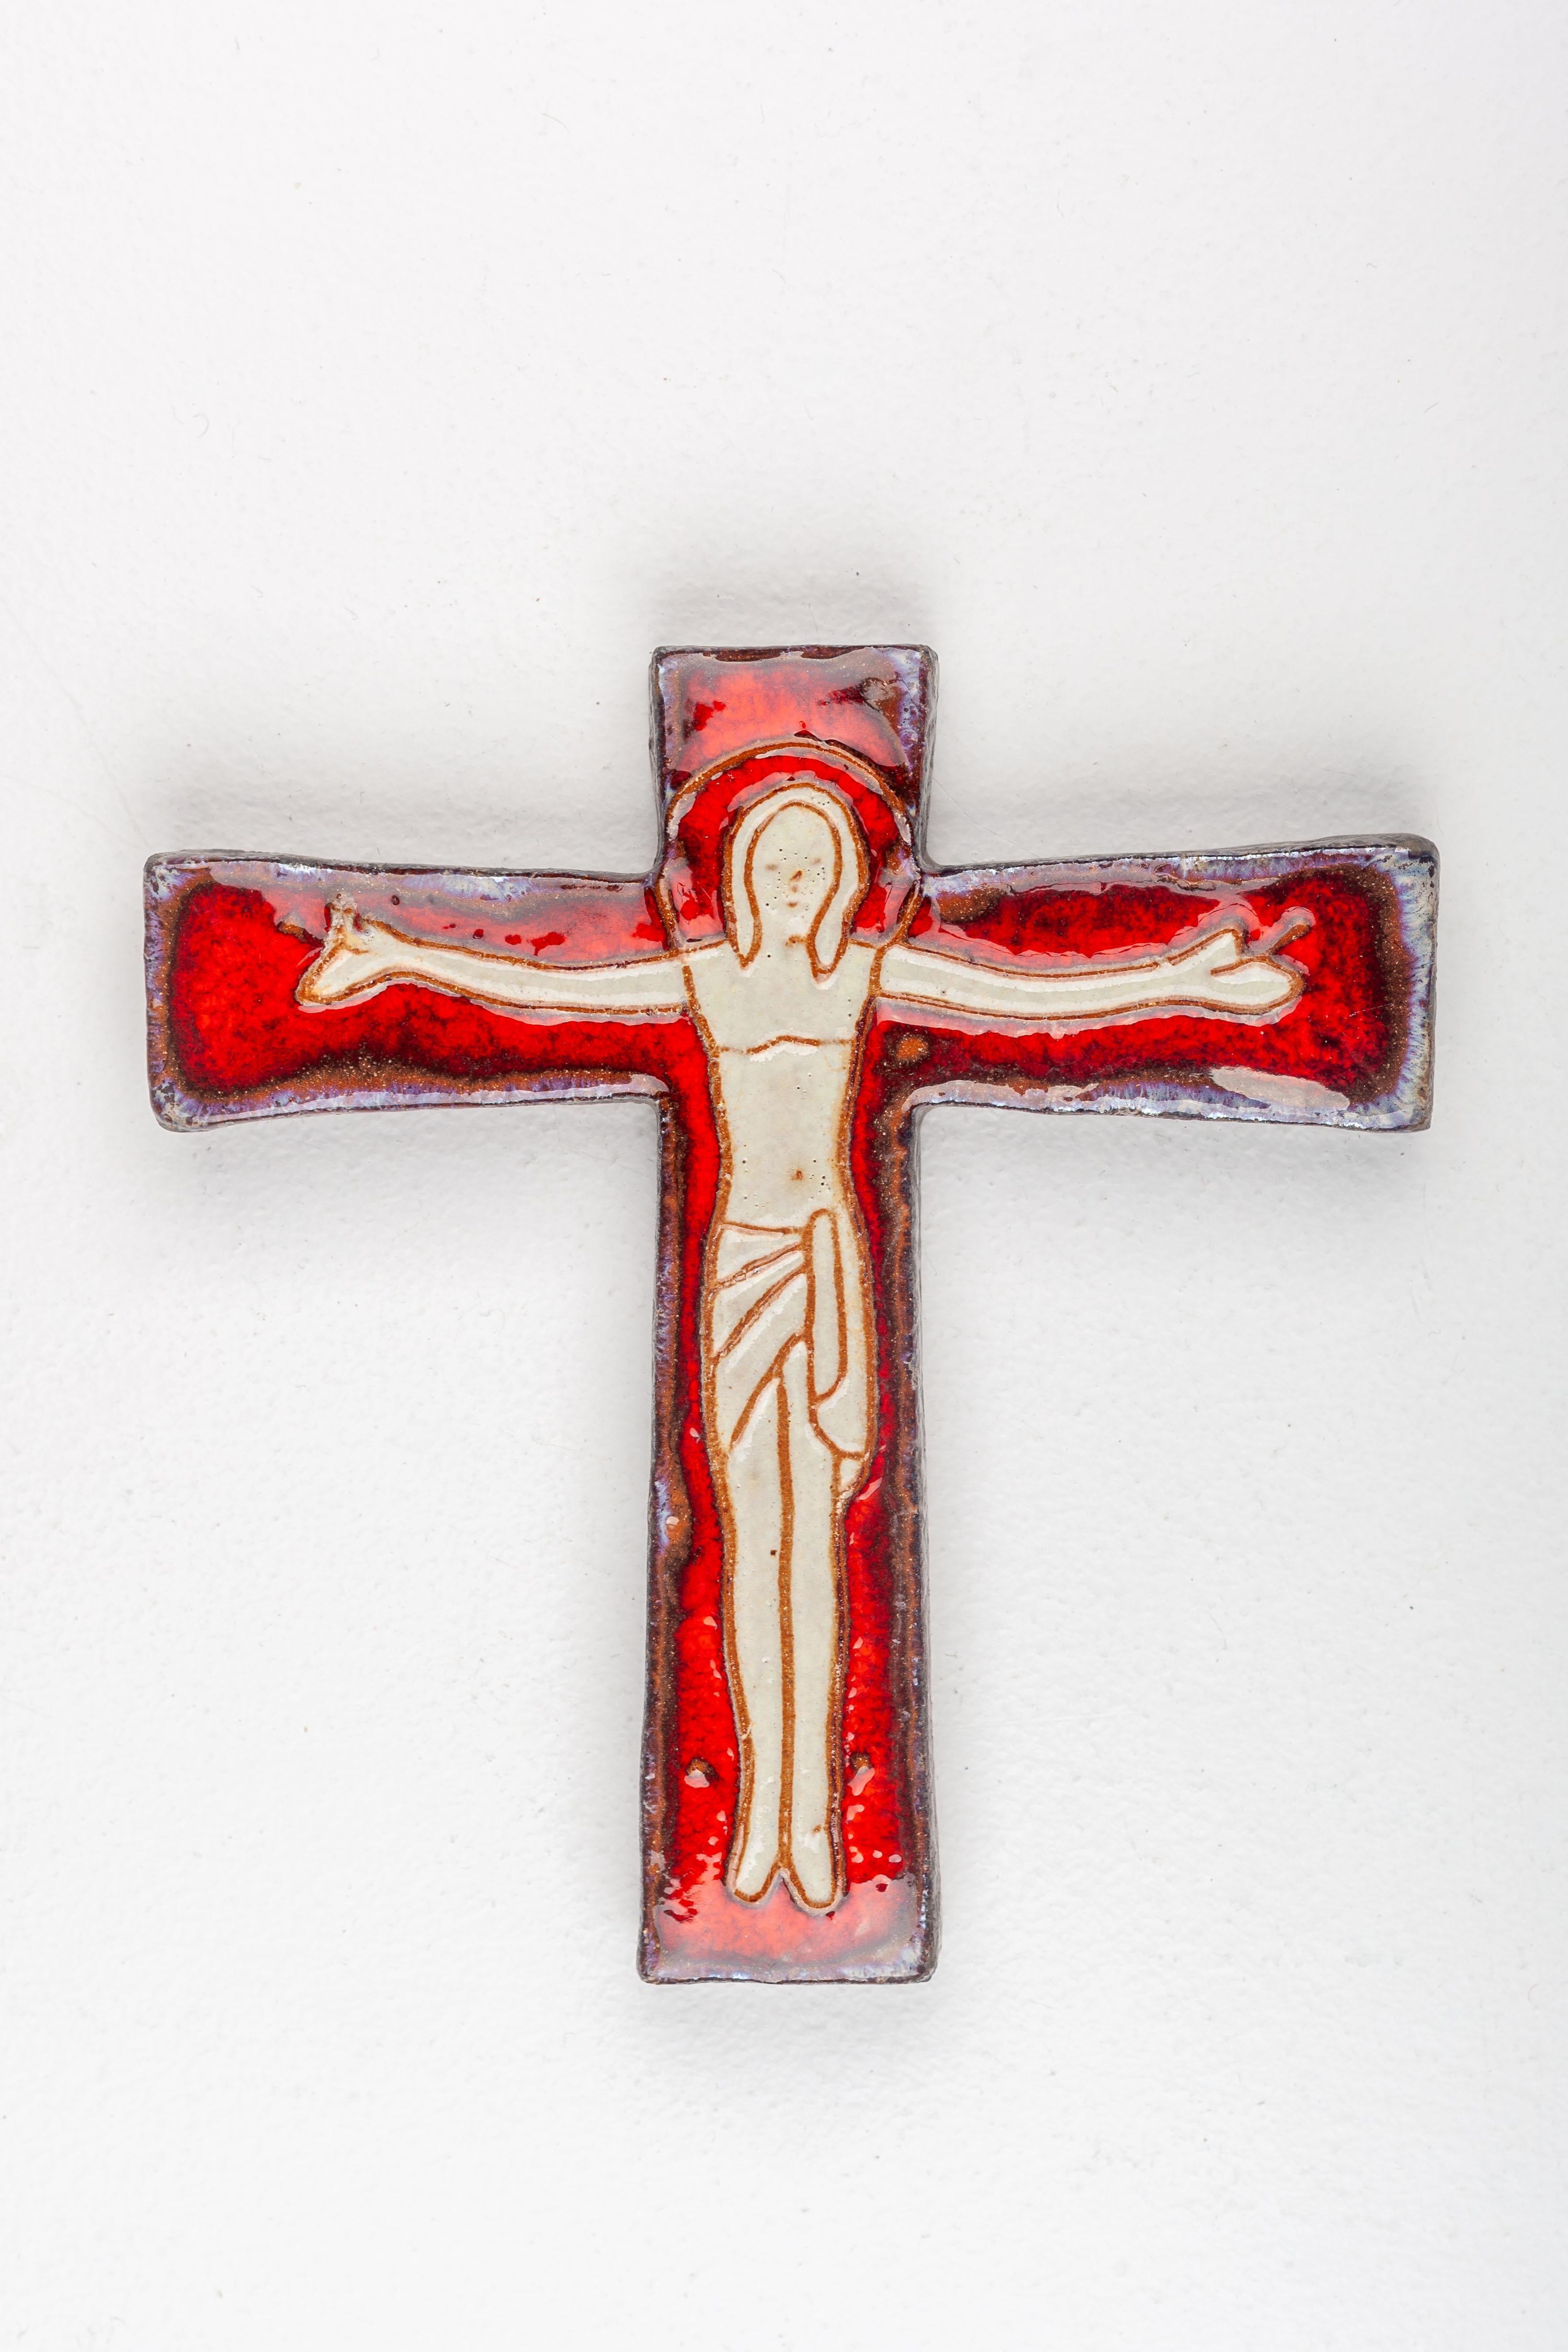 20th Century Mid Century Ceramic Wall Cross, Red & Beige, Hand Made Studio Pottery, Europe For Sale